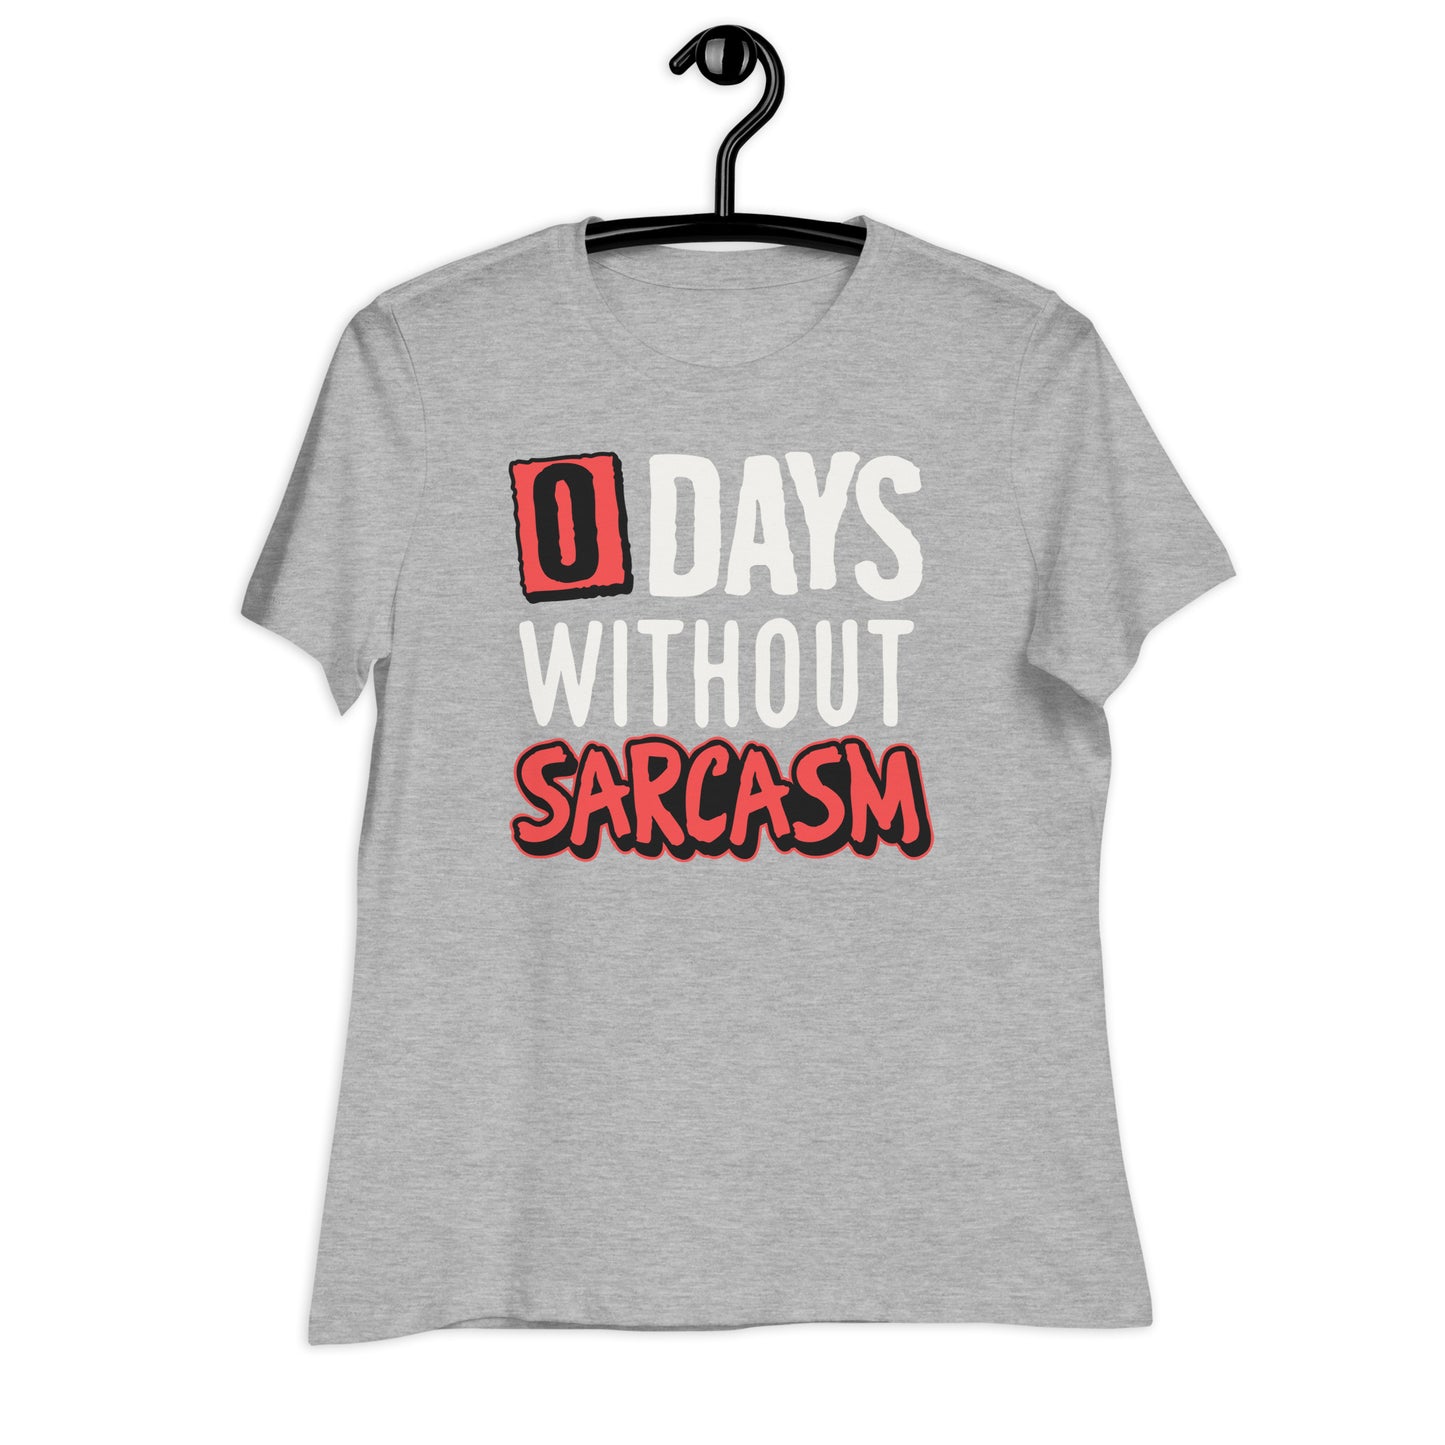 Zero Days without Sarcasm Funny Bella Canvas Relaxed Women's T-Shirt